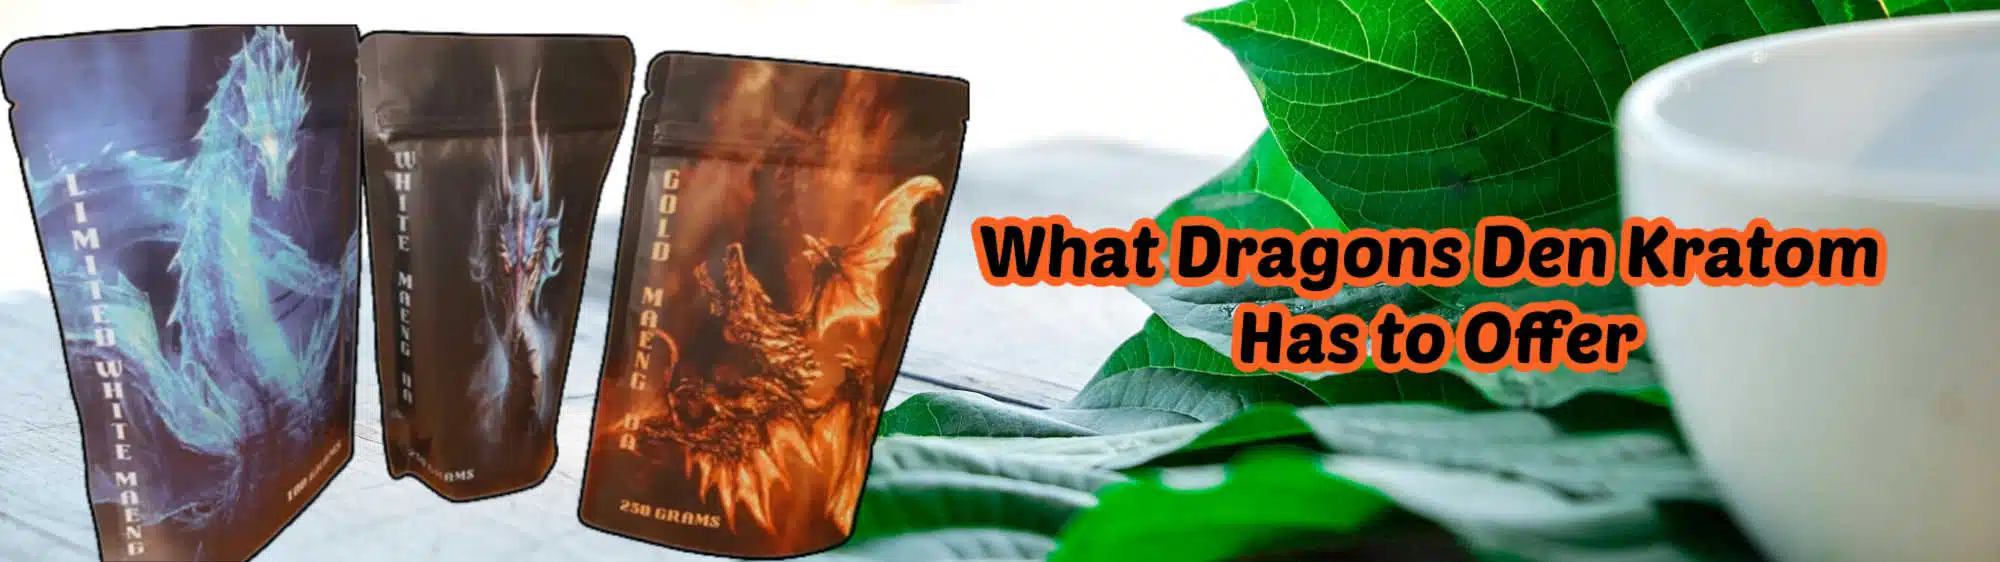 what dragons den kratom has to offer banner with product samples